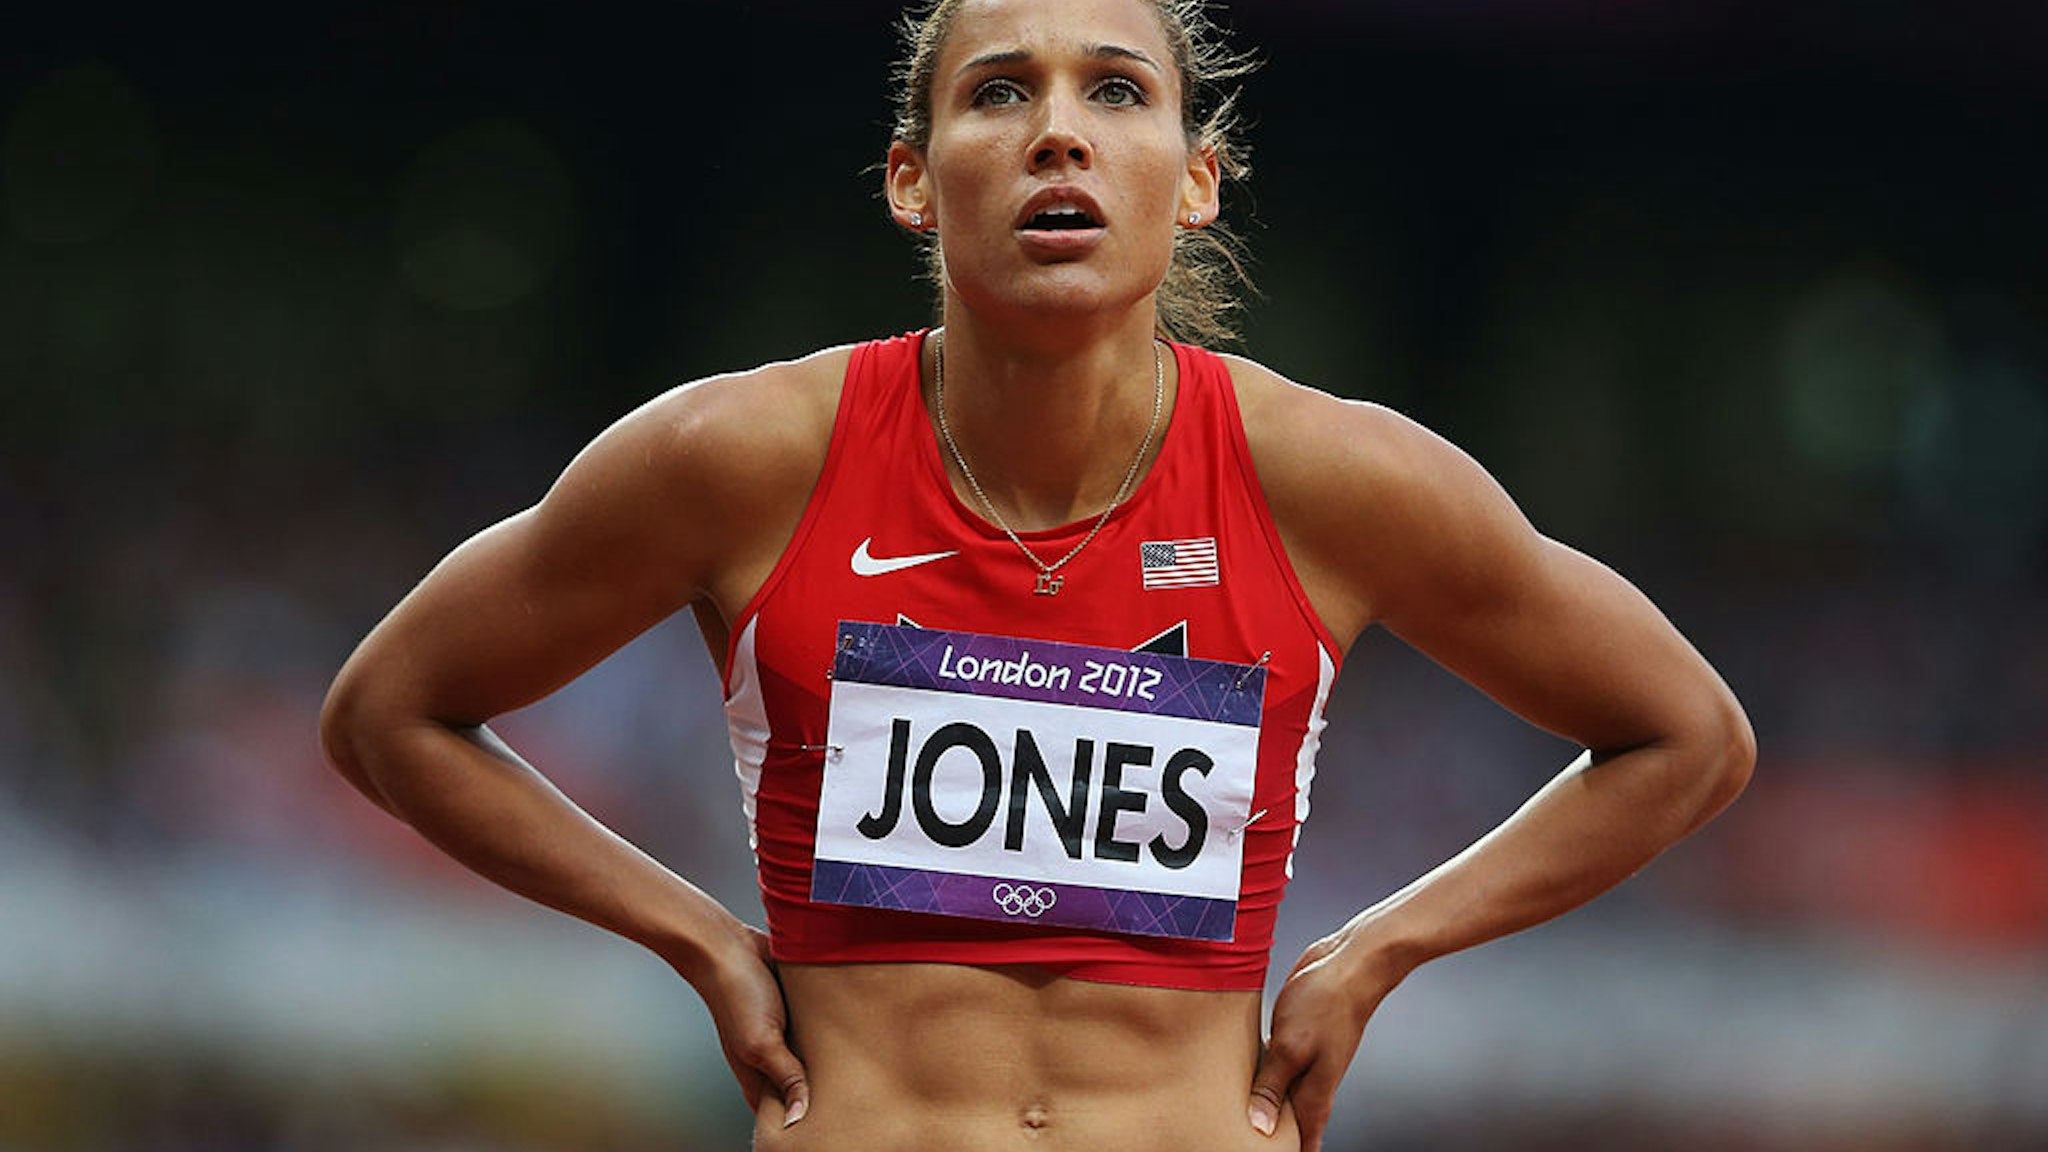 Lolo Jones of the United States looks on after competing in the Women's 100m Hurdles Semifinals on Day 11 of the London 2012 Olympic Games at Olympic Stadium on August 7, 2012 in London, England.